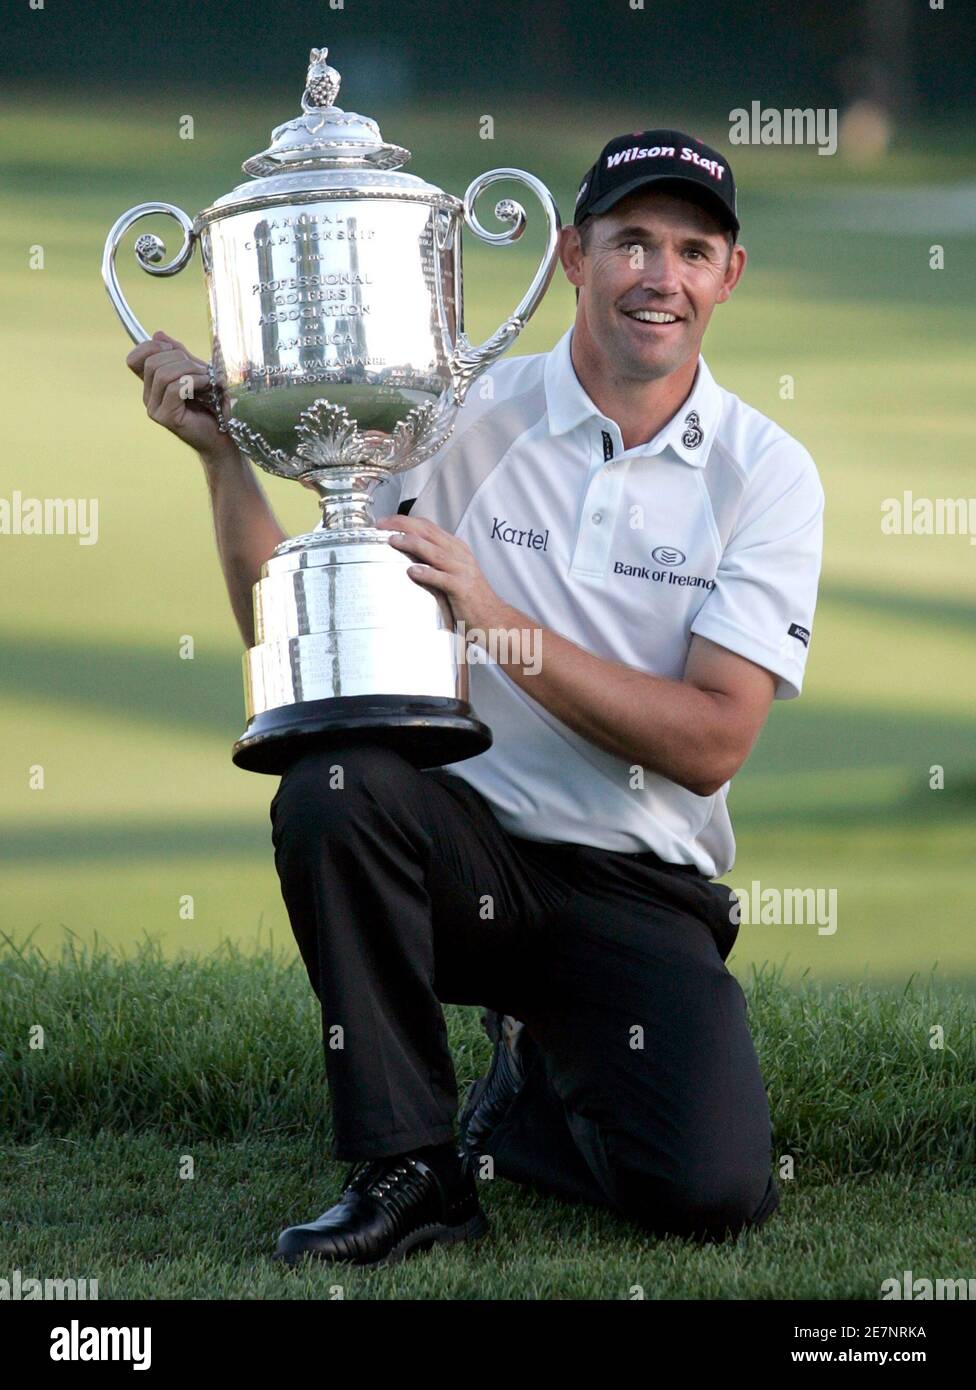 2008 pga championship in oakland hills hi-res stock photography and images  - Alamy